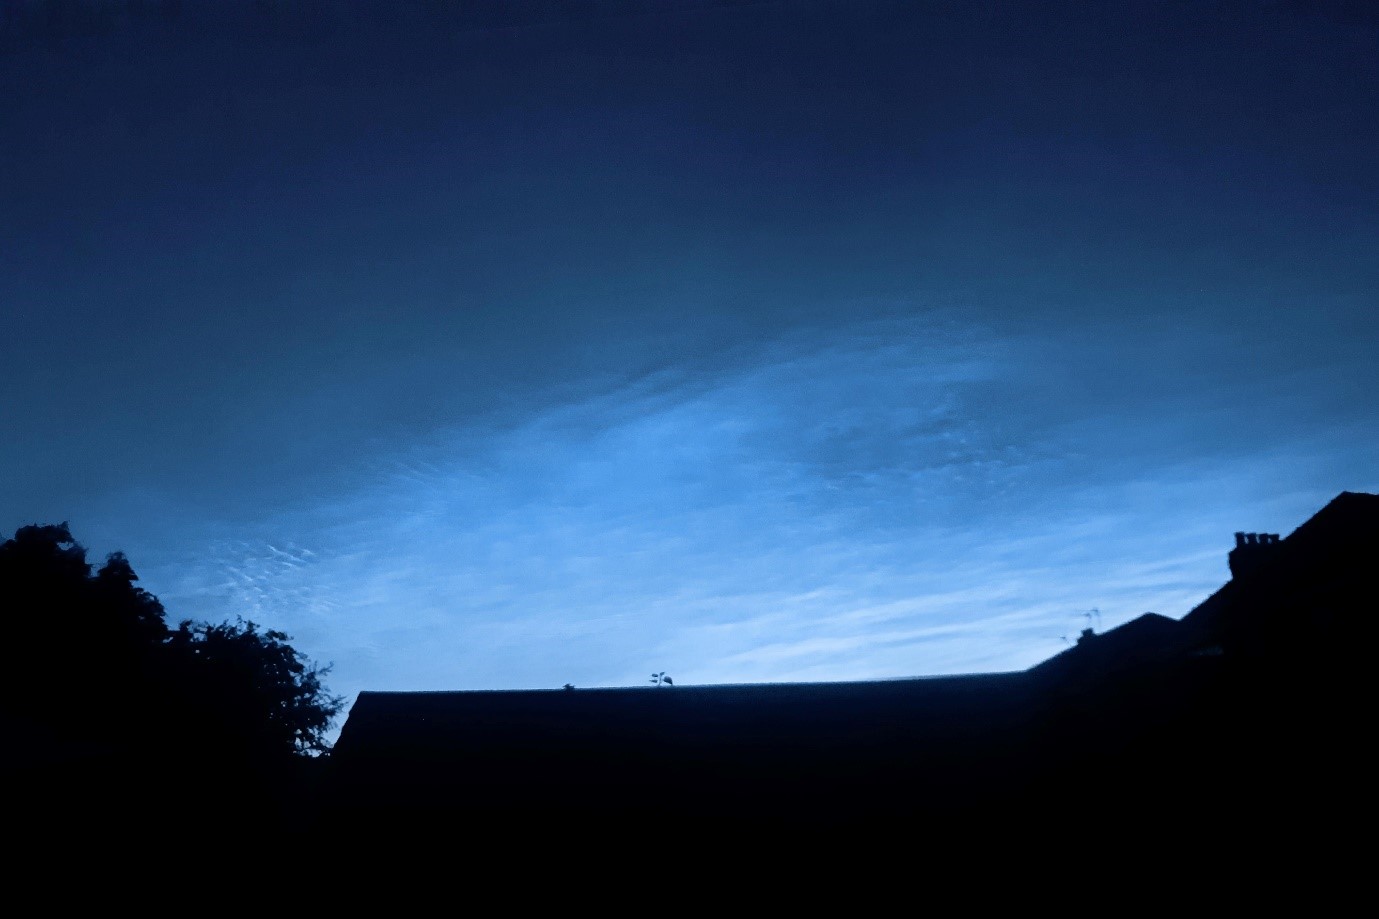 Noctilucent clouds visible in a dark blue night sky